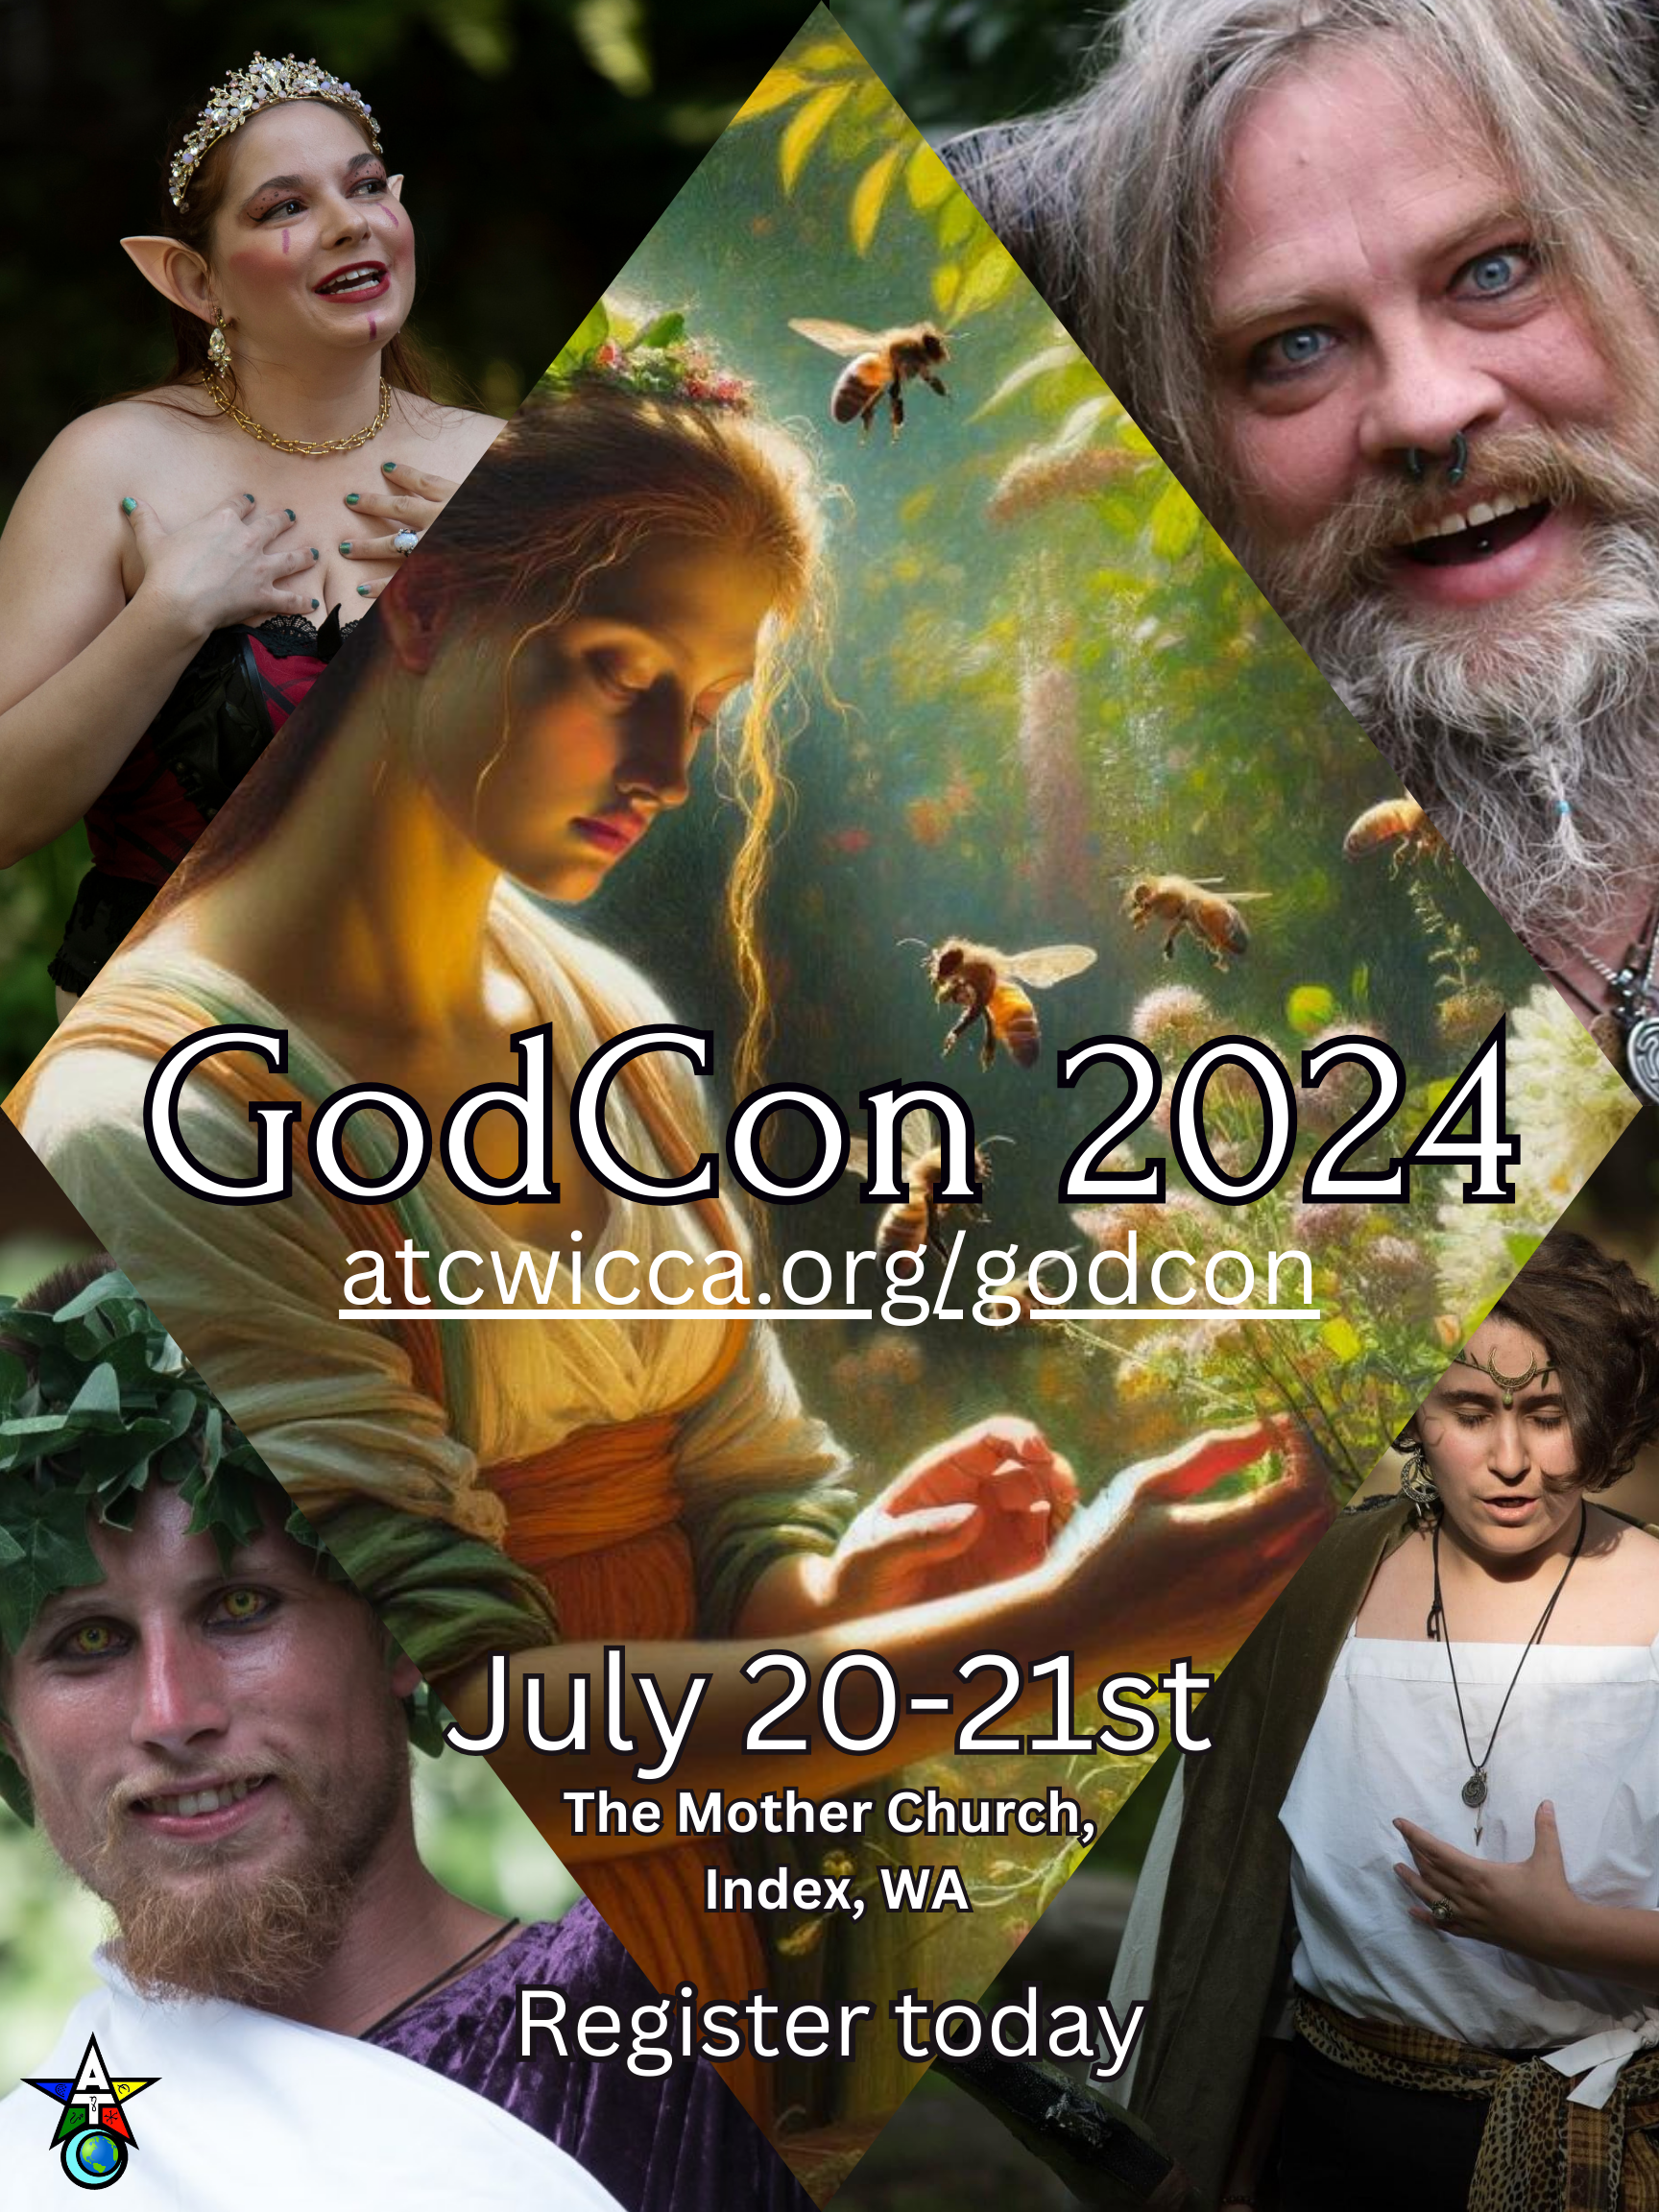 A poster for godcon 2024, showing nature, Gods, and Goddesses.